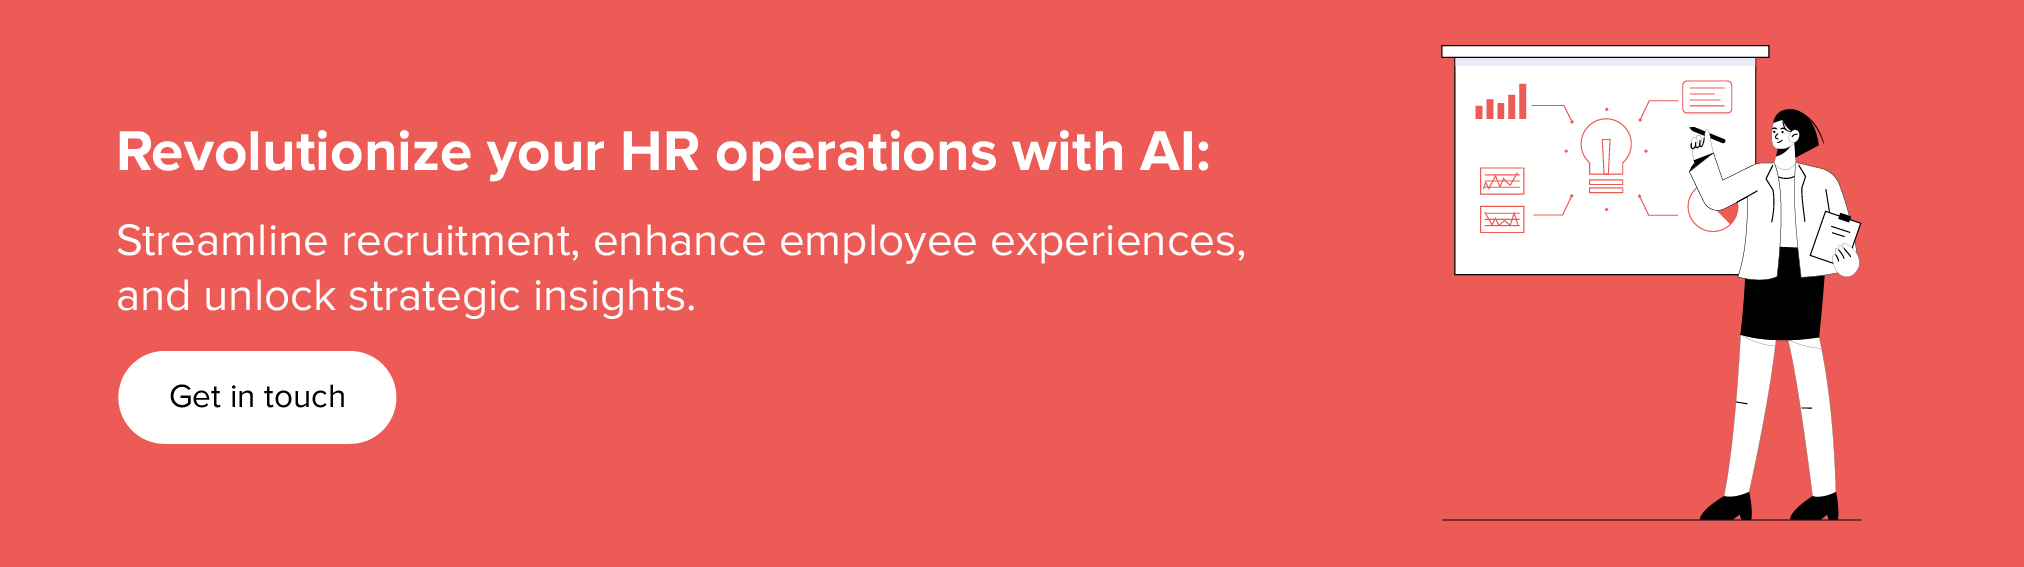 HR operations with AI